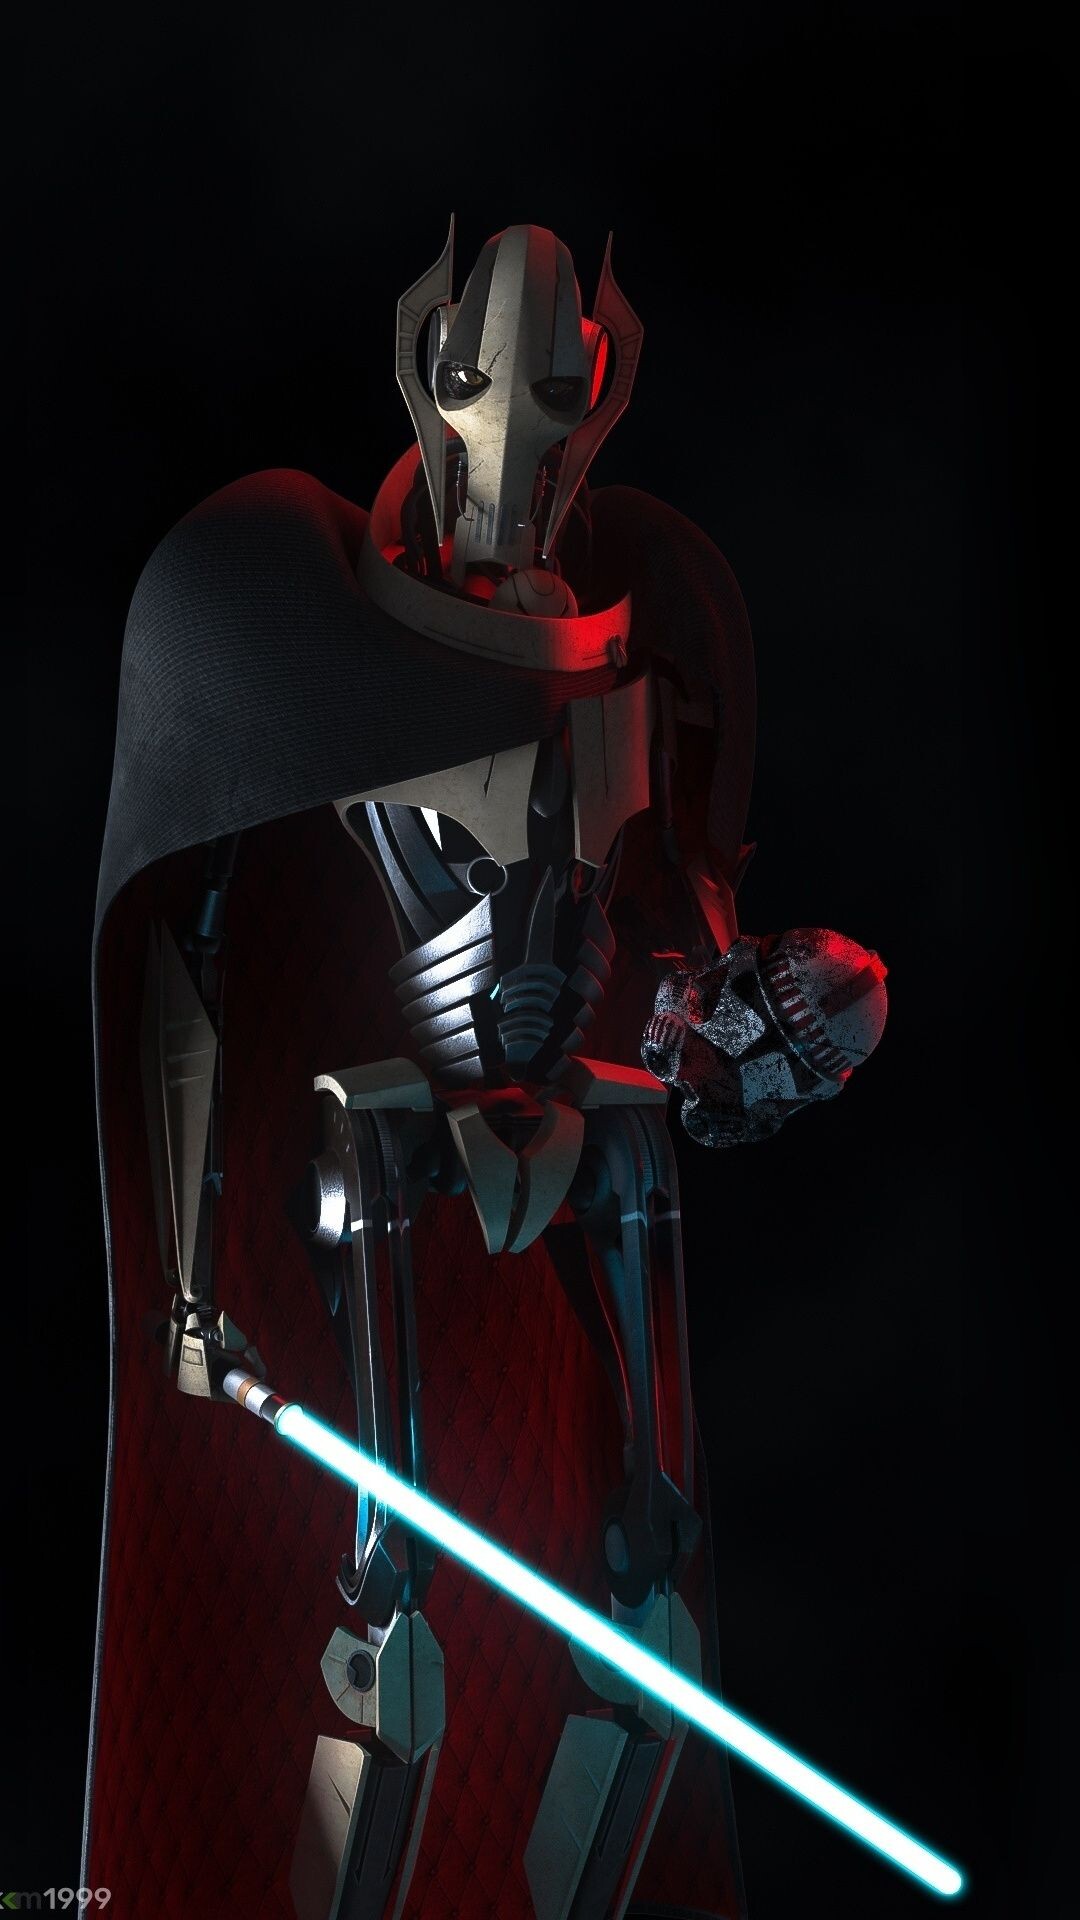 General Grievous: An enemy feared by clones and Jedi, The fearless supreme commander of the Droid Army. 1080x1920 Full HD Wallpaper.